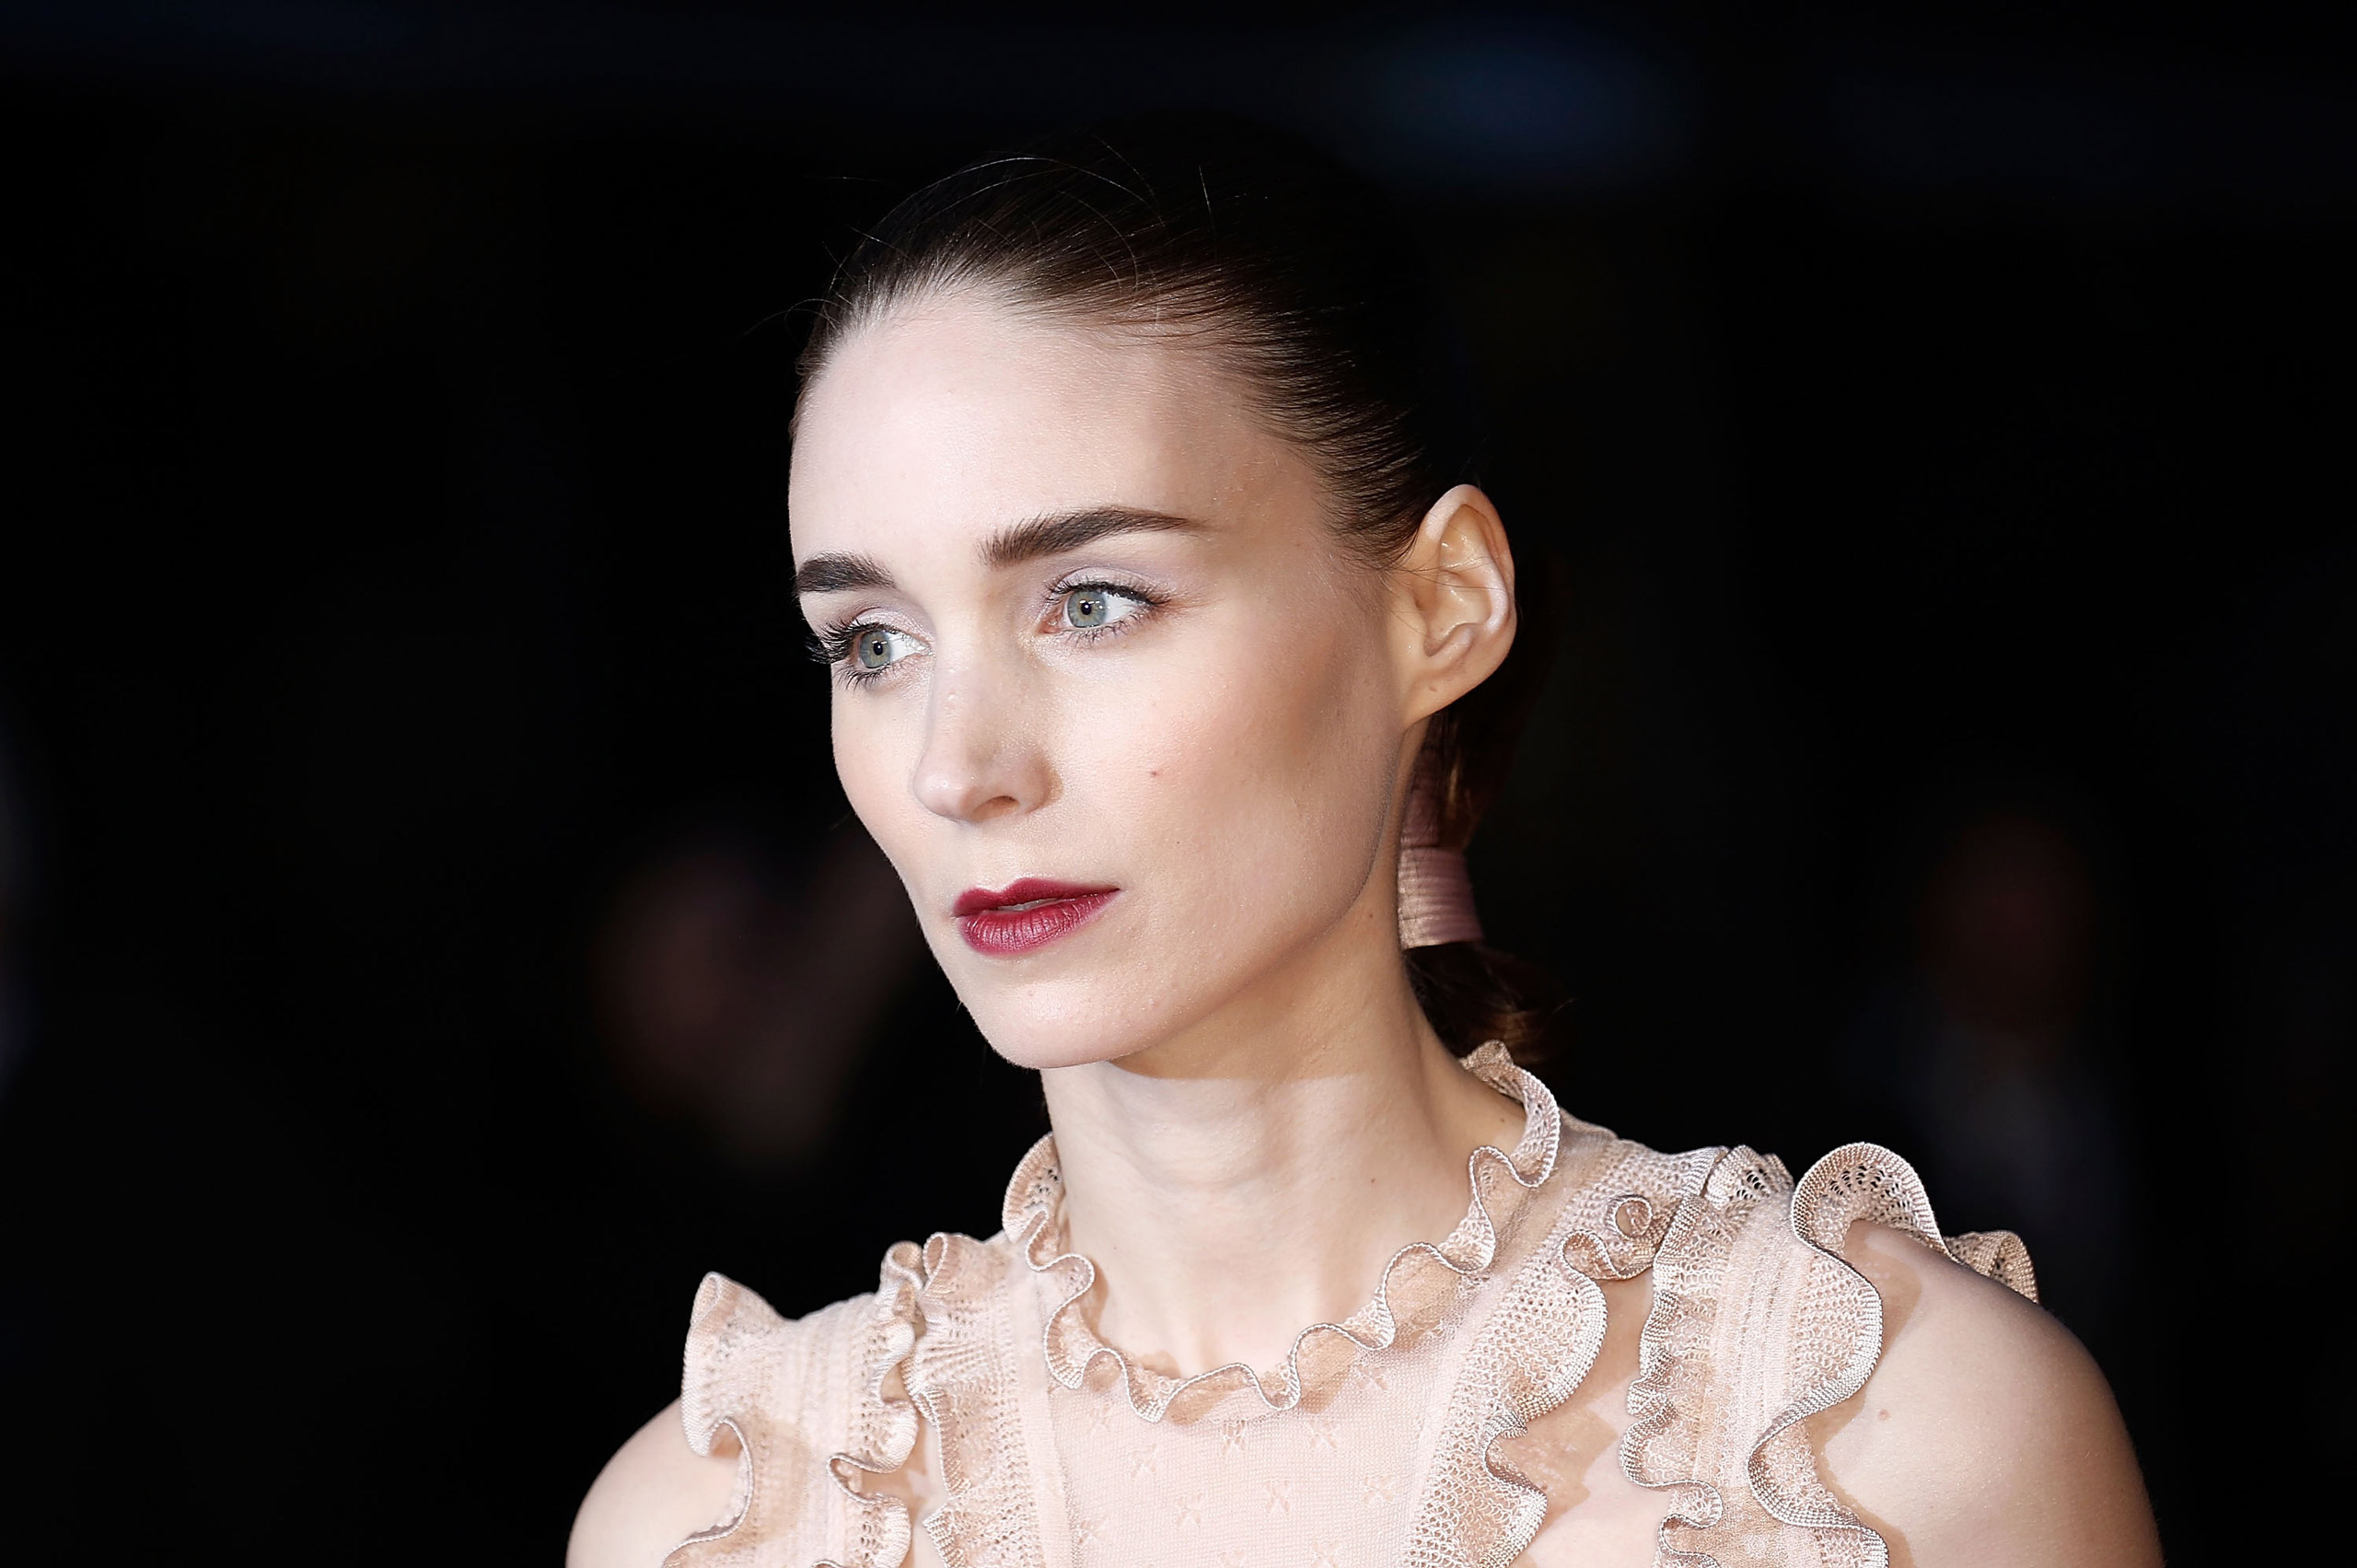 Rooney Mara attends the "Carol" America Express Gala during the BFI London Film Festival in London on Oct. 14, 2015. (John Phillips—Getty Images)